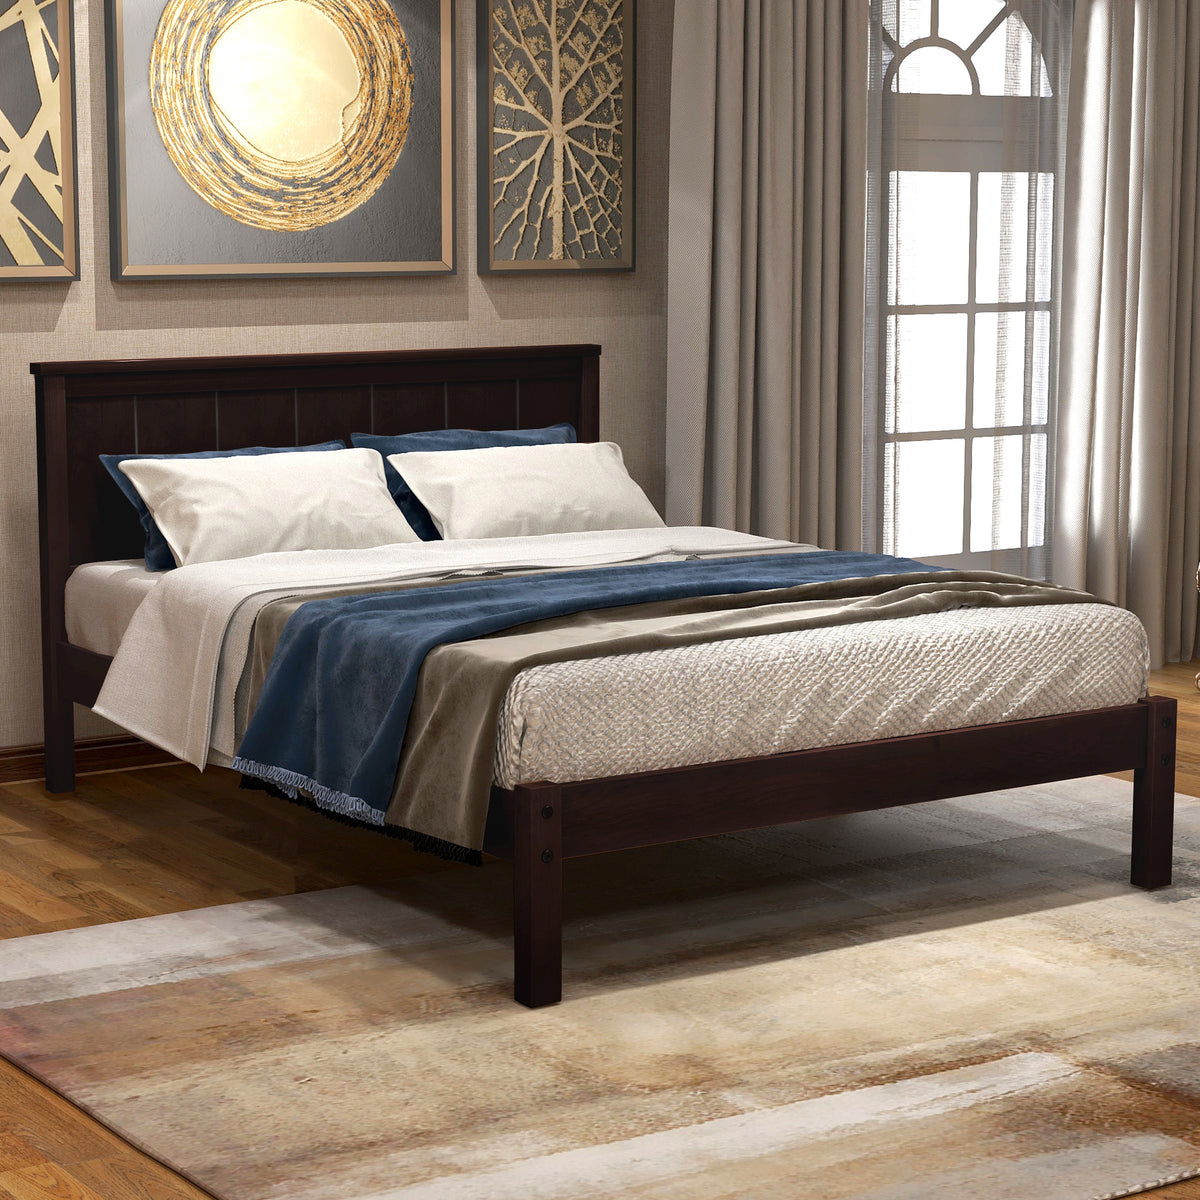 Twin Size Wood Bed Frame with Headboard, Espresso